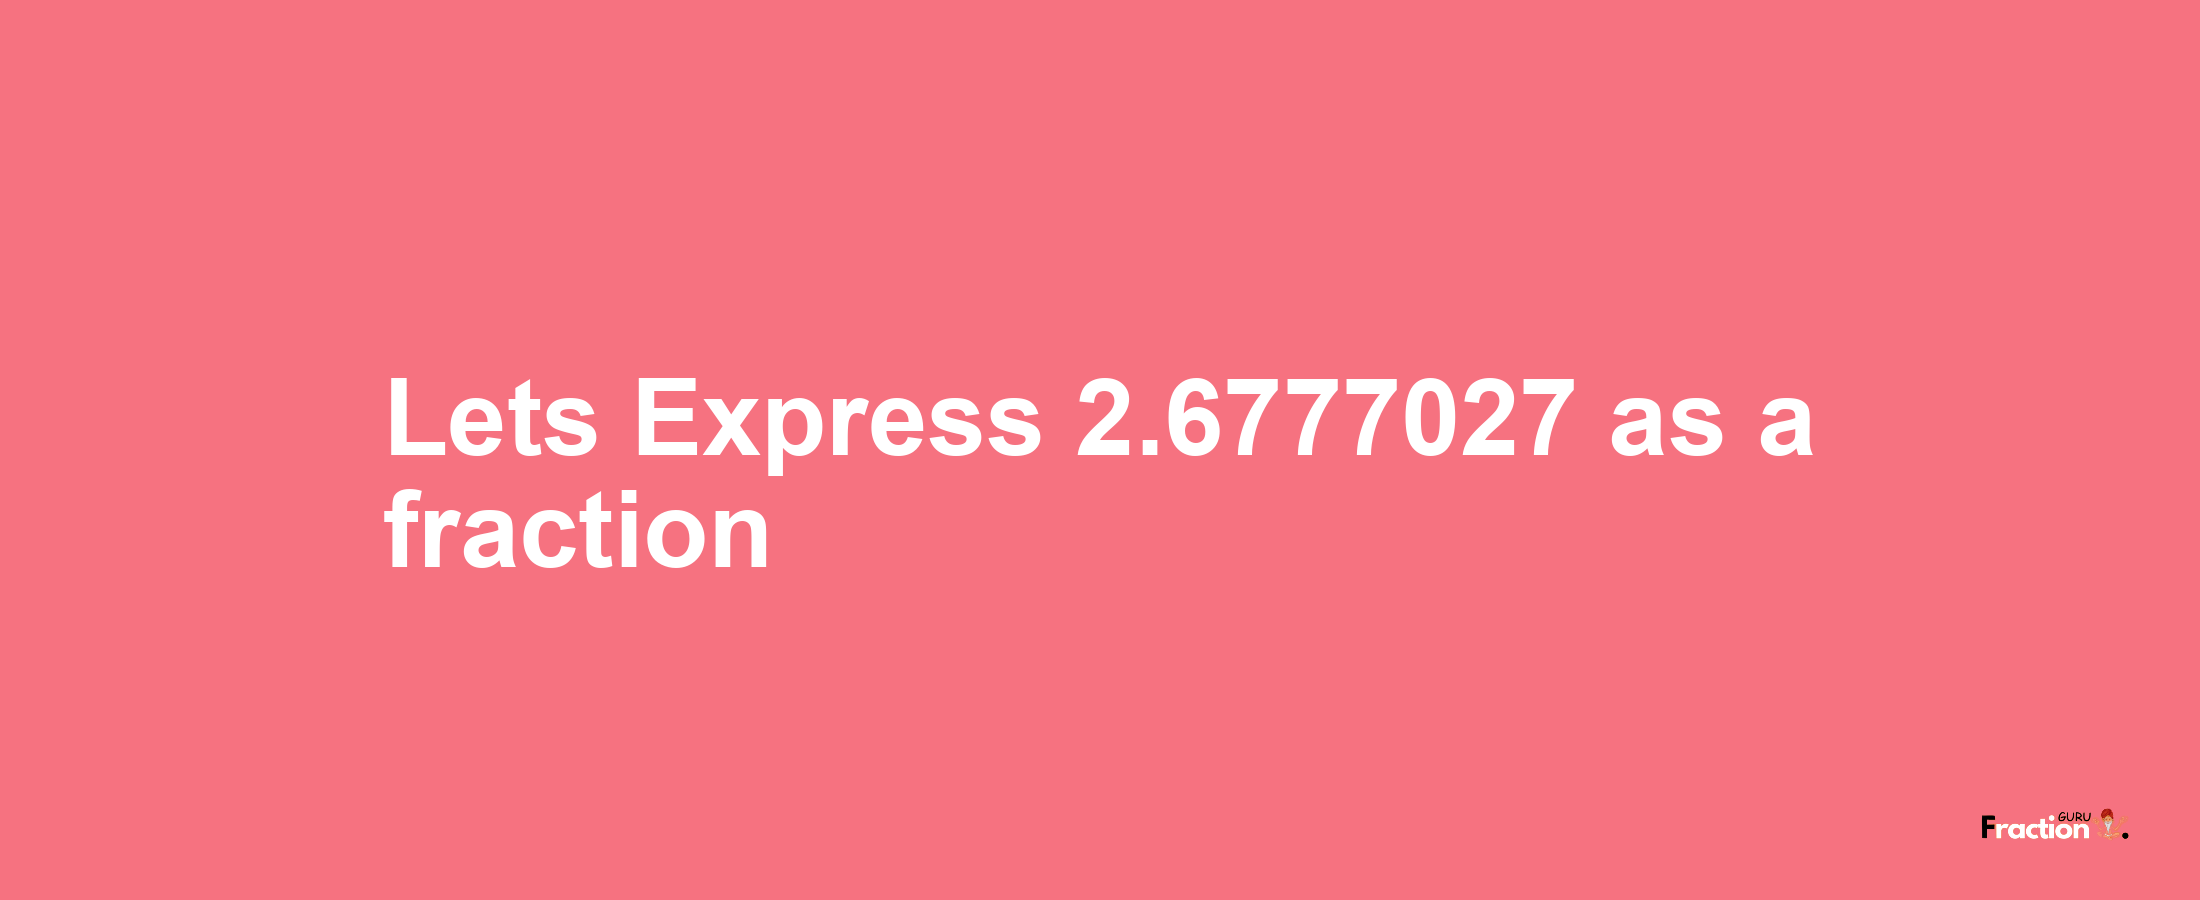 Lets Express 2.6777027 as afraction